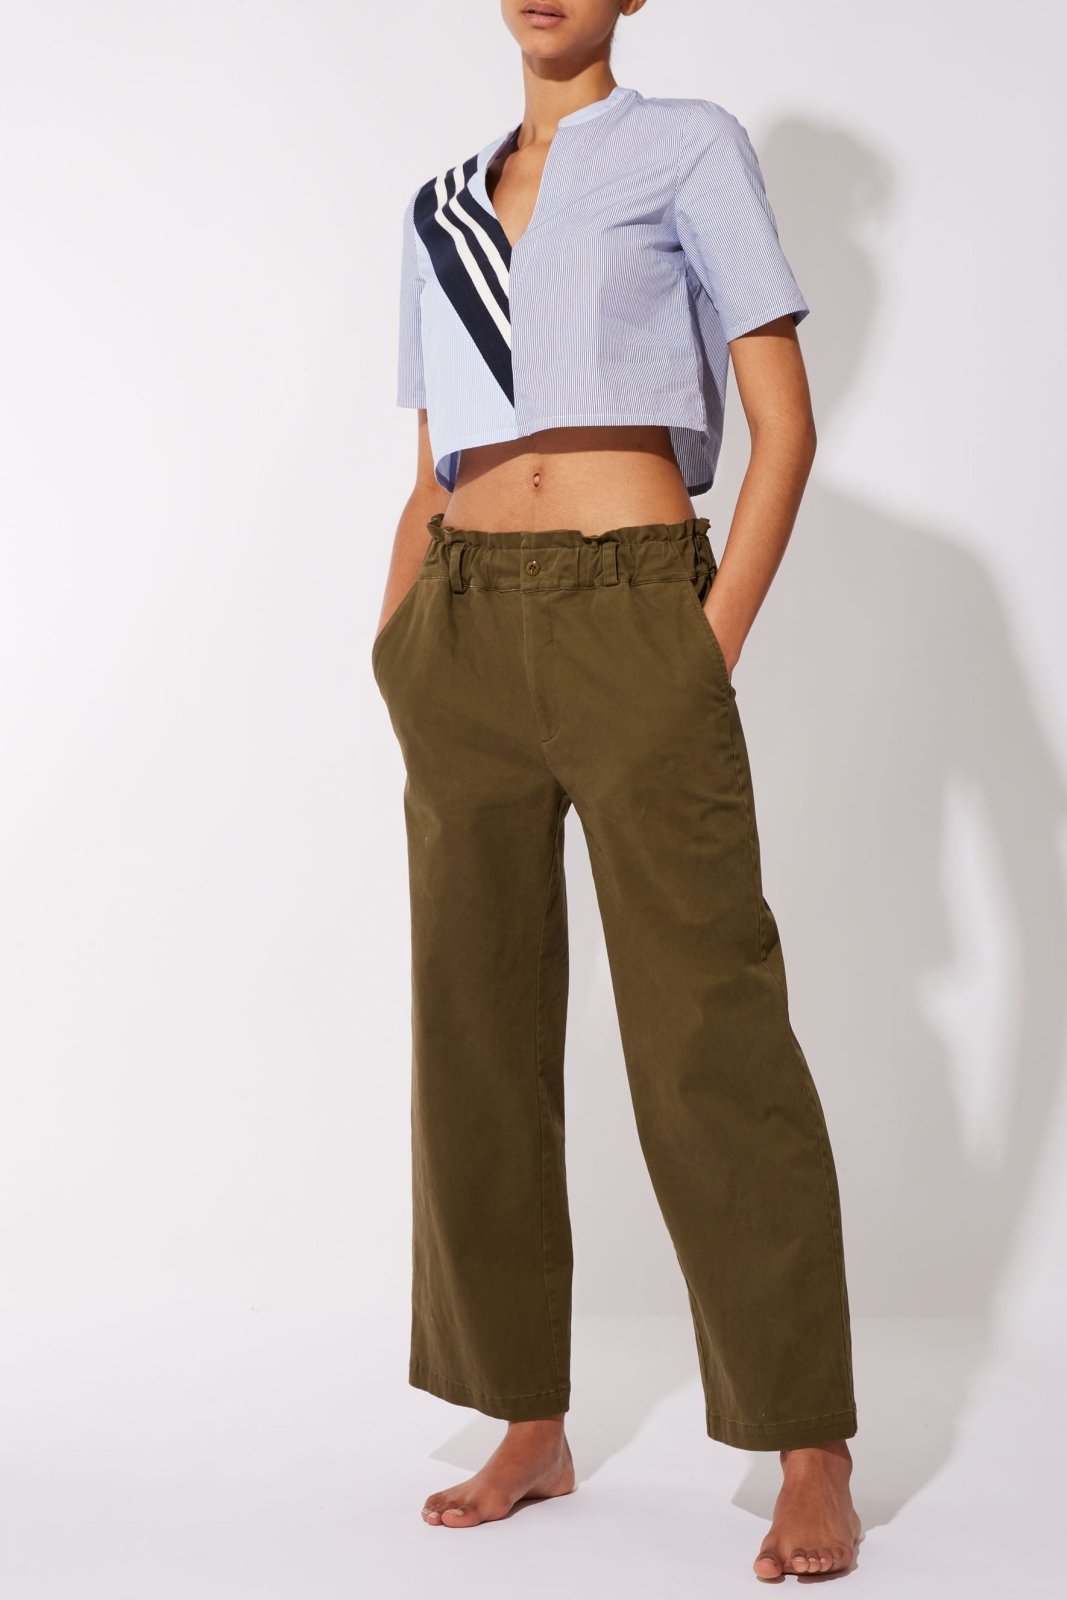 The Elly Pant Solid Striped